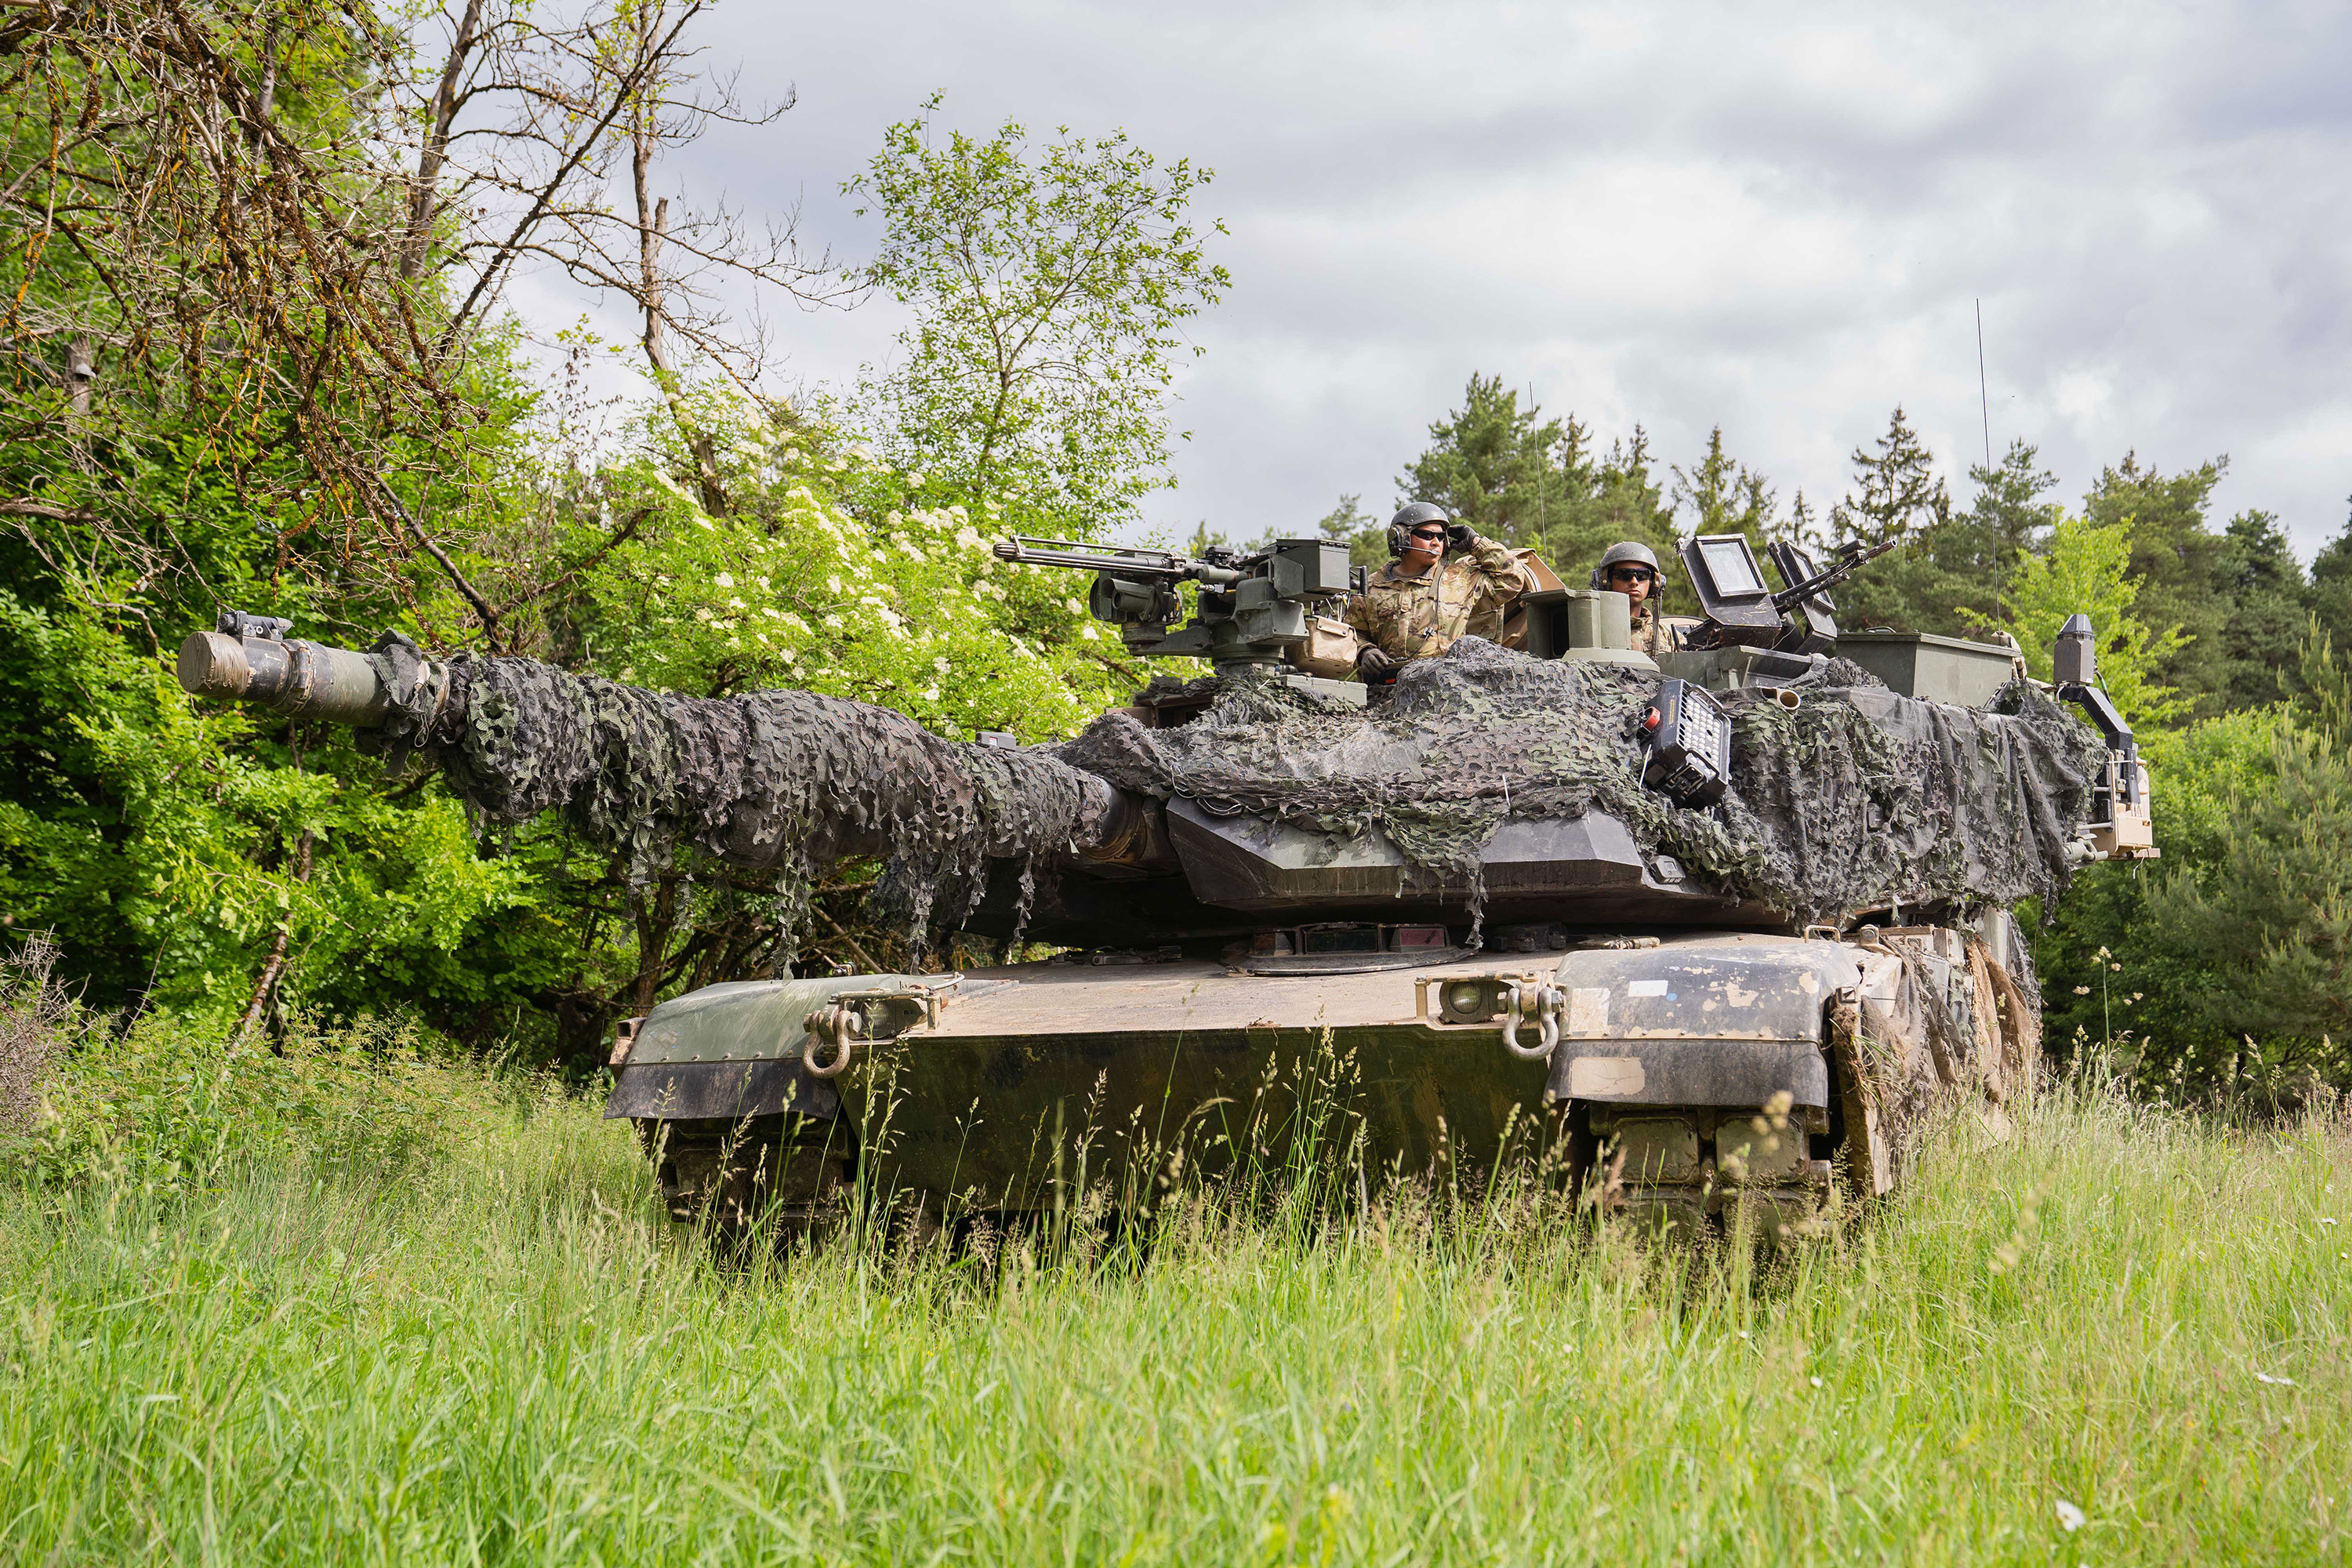 US soldiers stand with an M1 Abrams tank in a wooded area during a multinational exercise in Hohenfels, Germany, in June 2022.